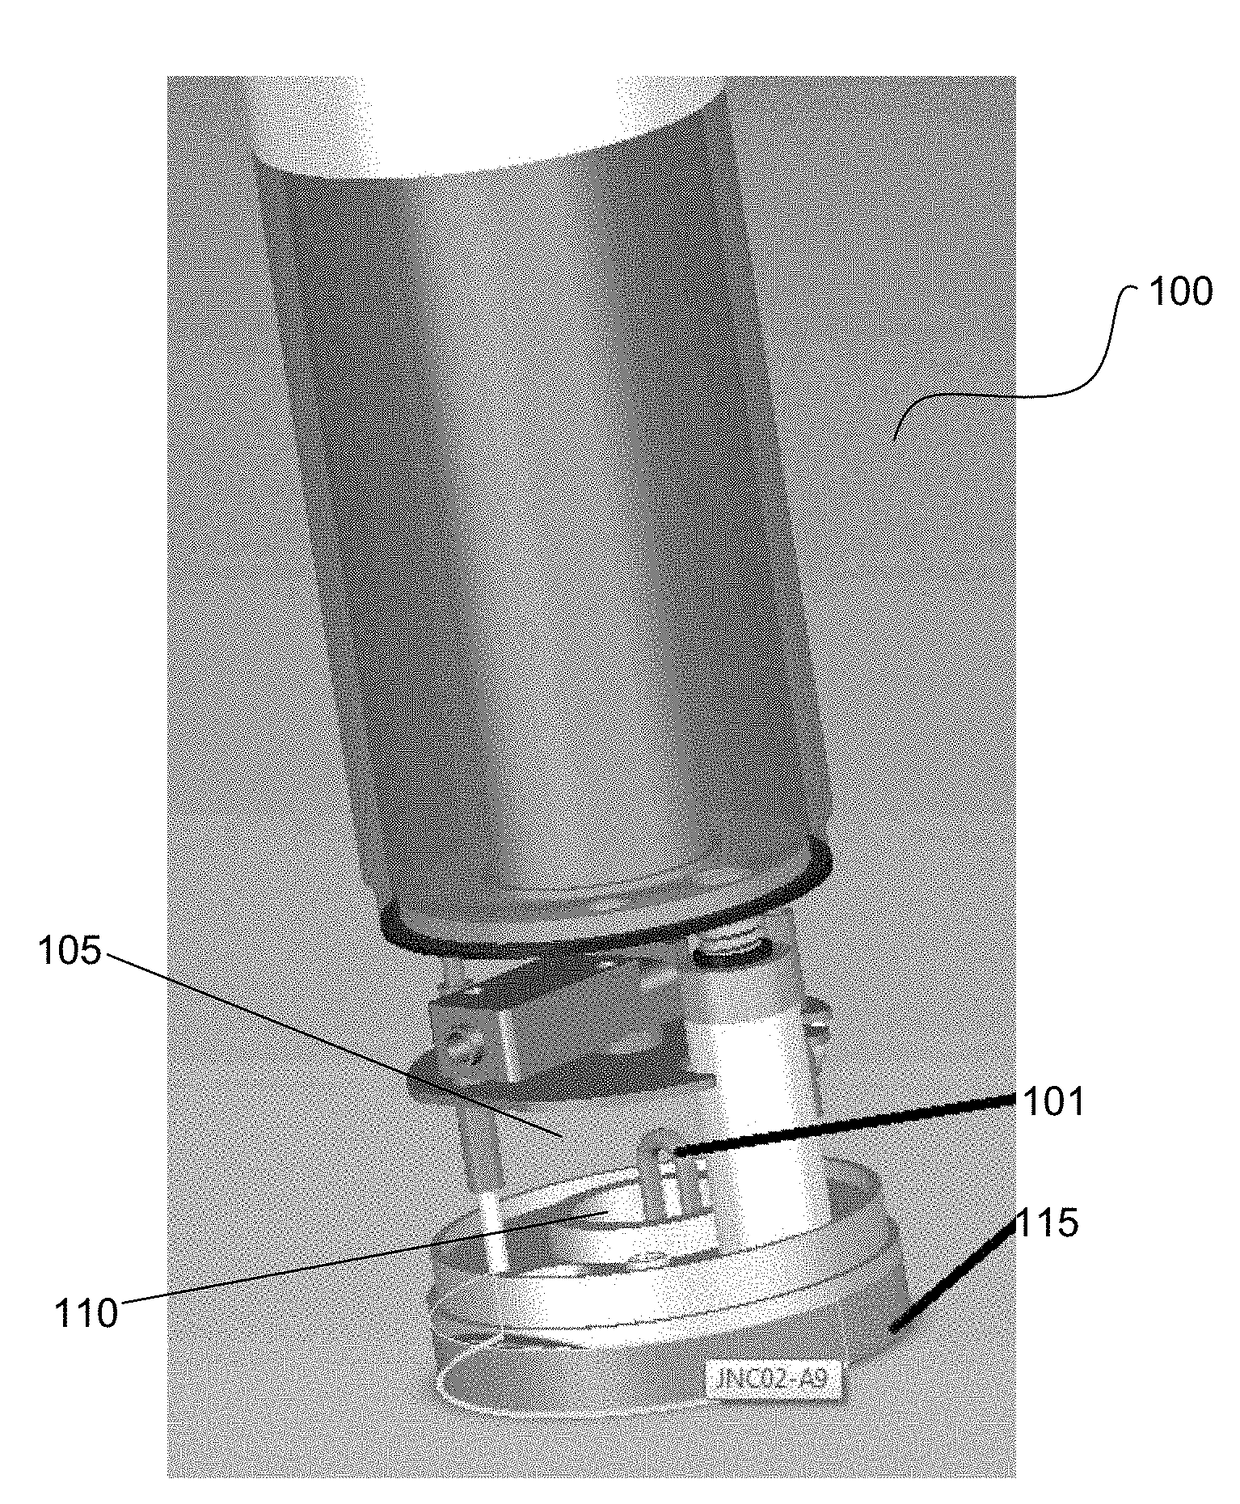 Inhalation device with heating, stirring and leak preventing components